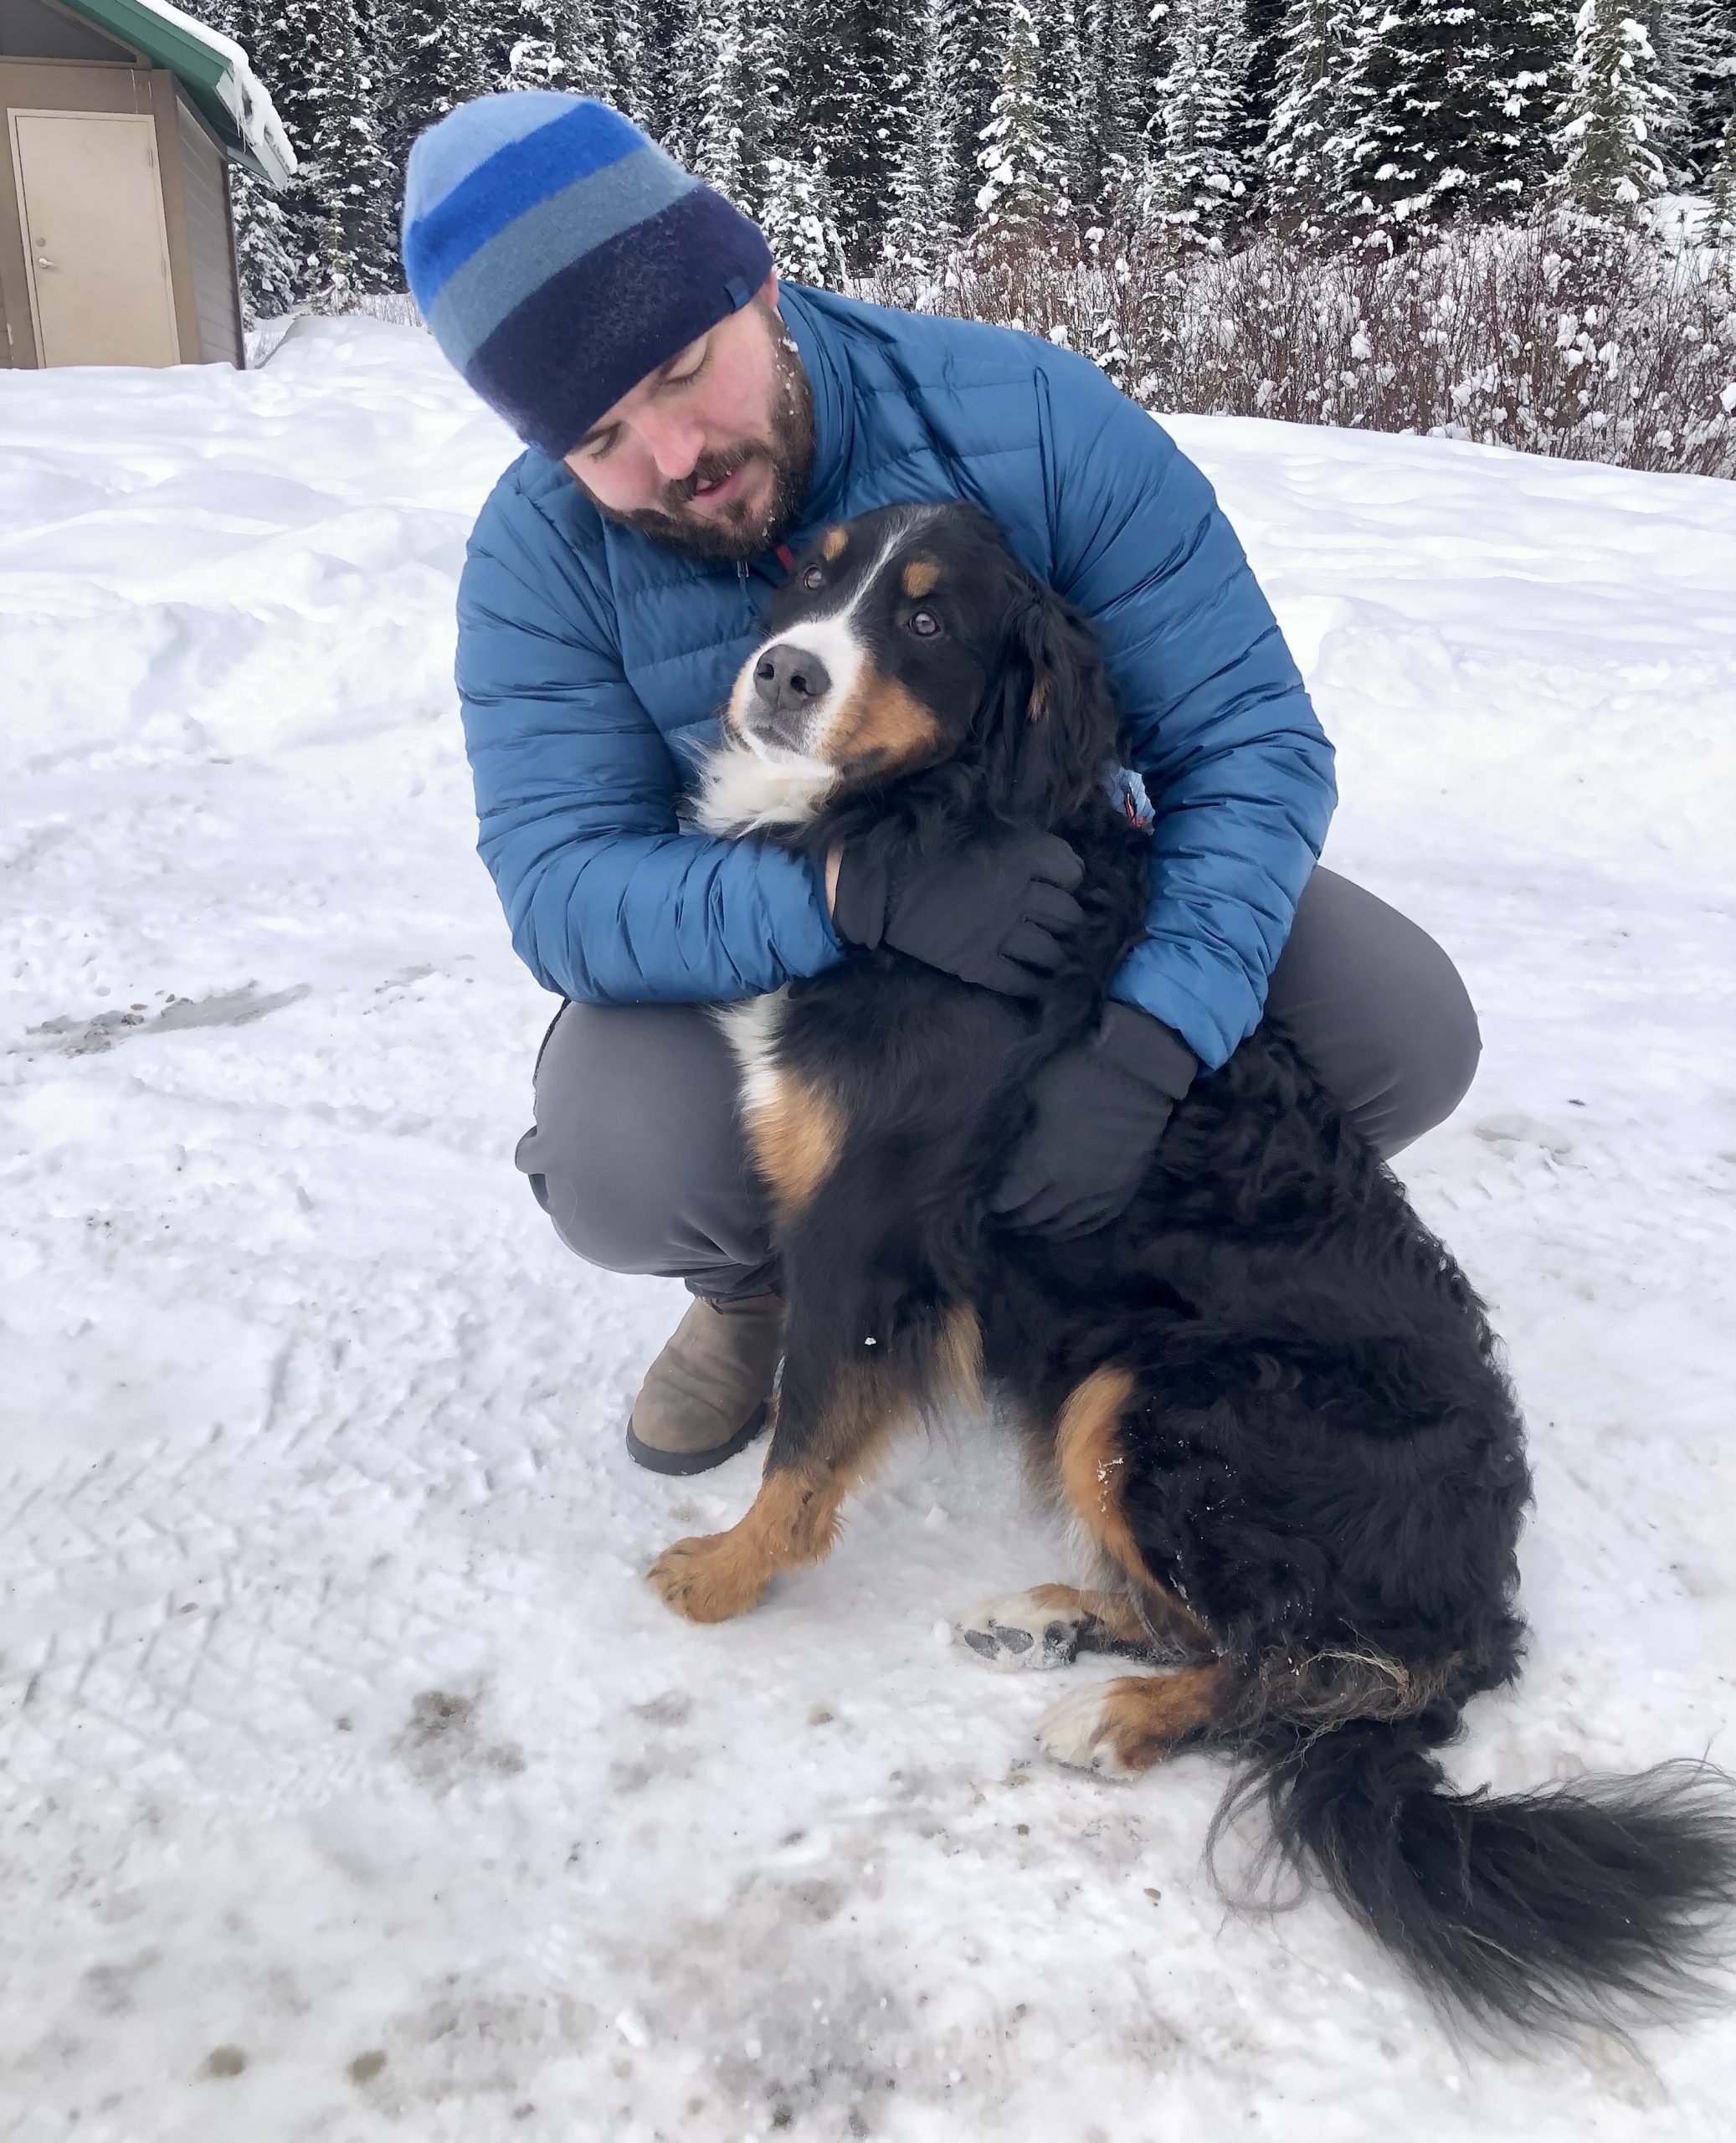 Man and Bernese mountain dog on winter day